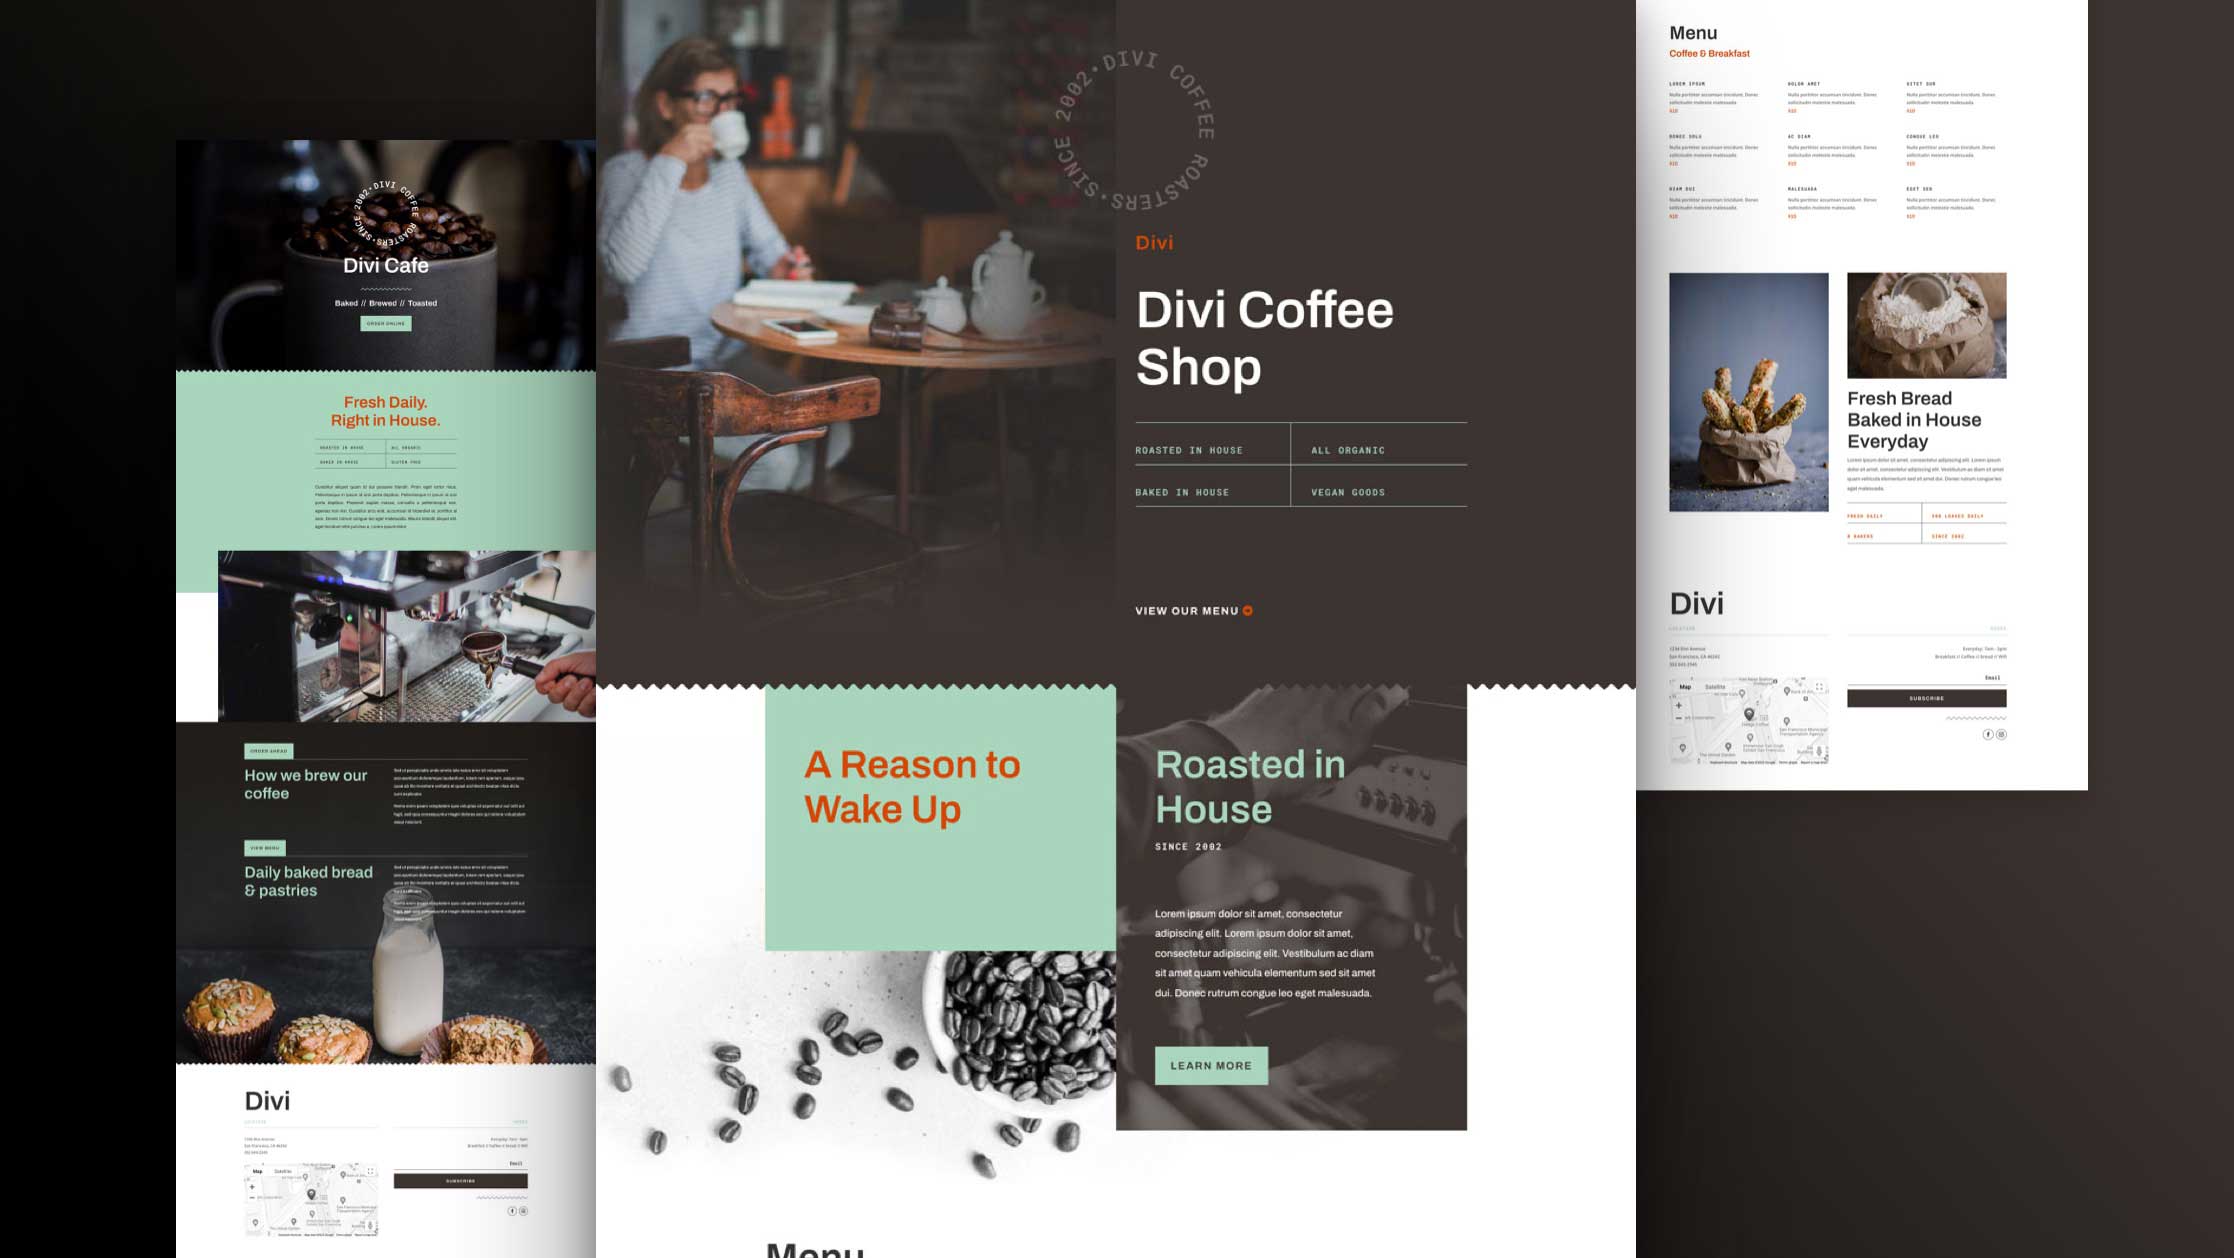 Get a FREE Cafe Layout Pack for Divi